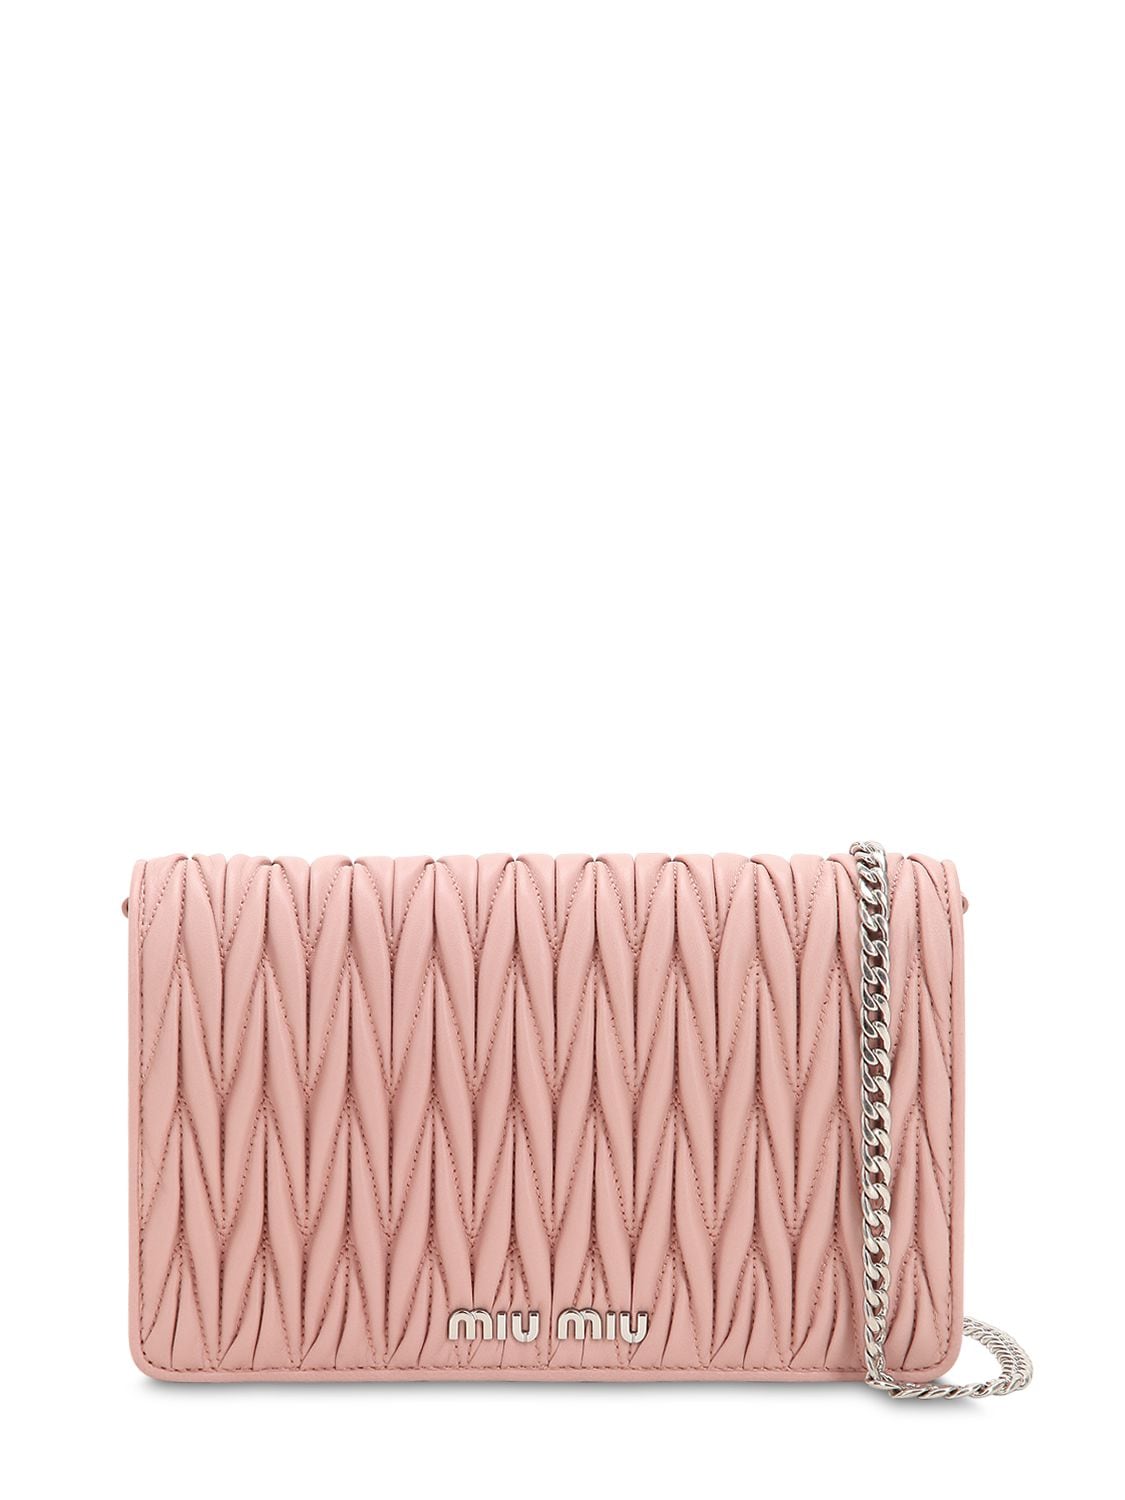 Miu Miu Mini Delice Quilted Leather Shoulder Bag In Pink